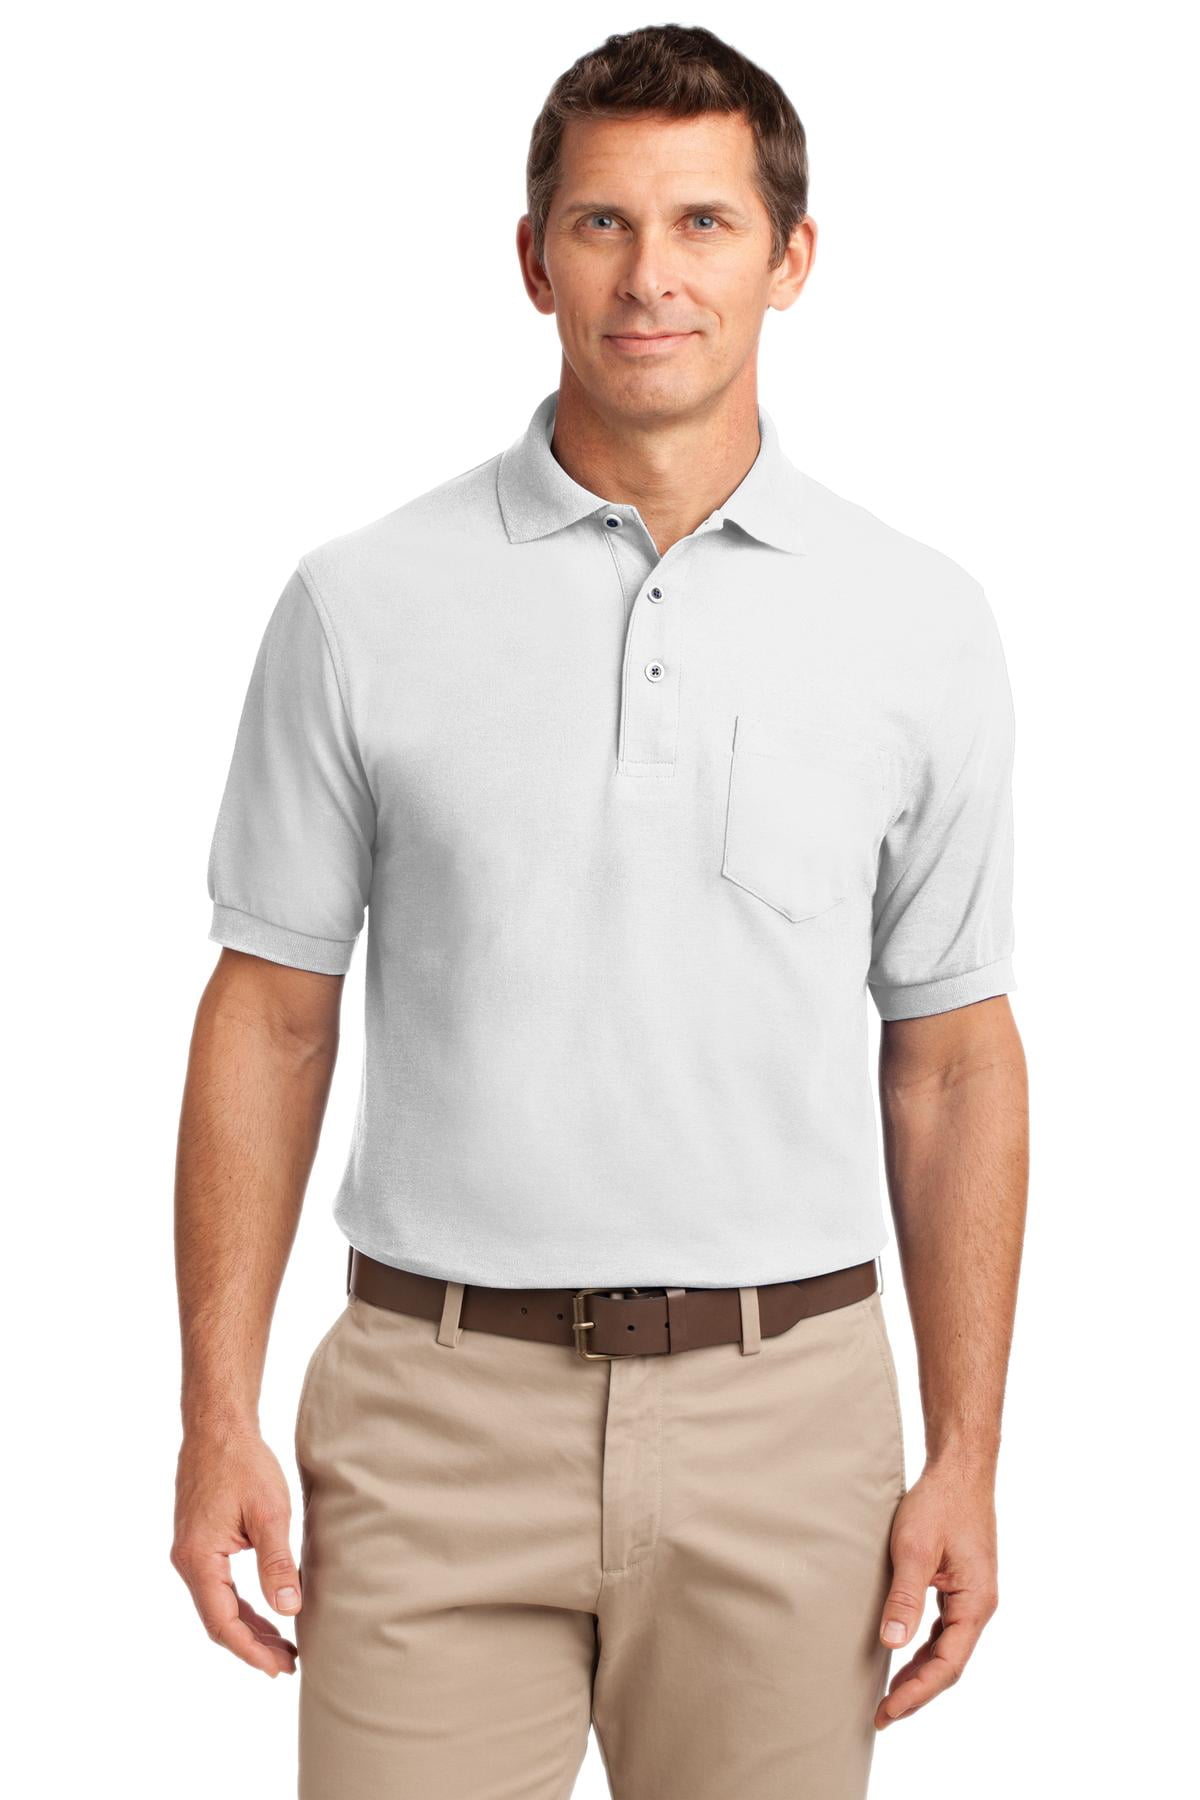 K500P Port Authority Silk Touch Polo with Pocket